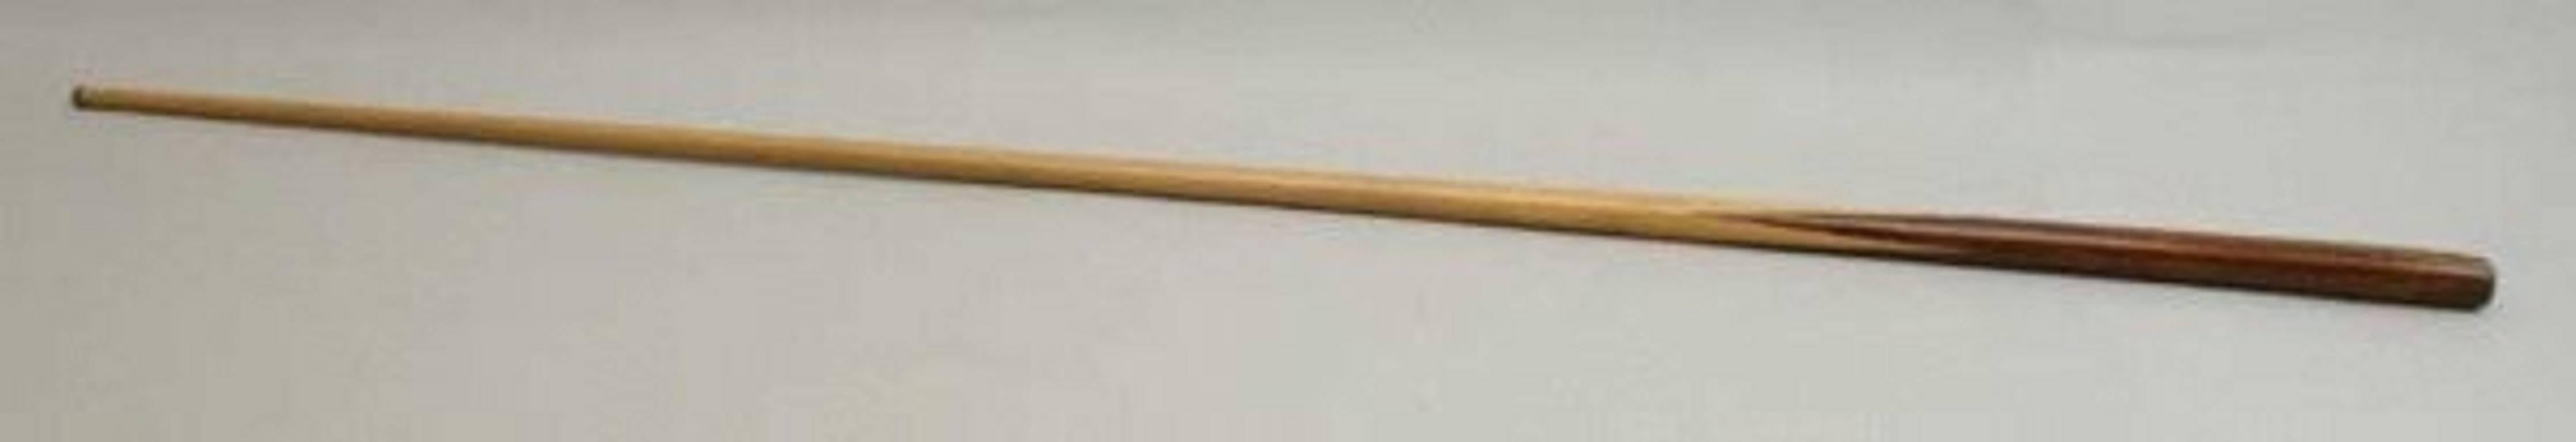 horace lindrum snooker cue